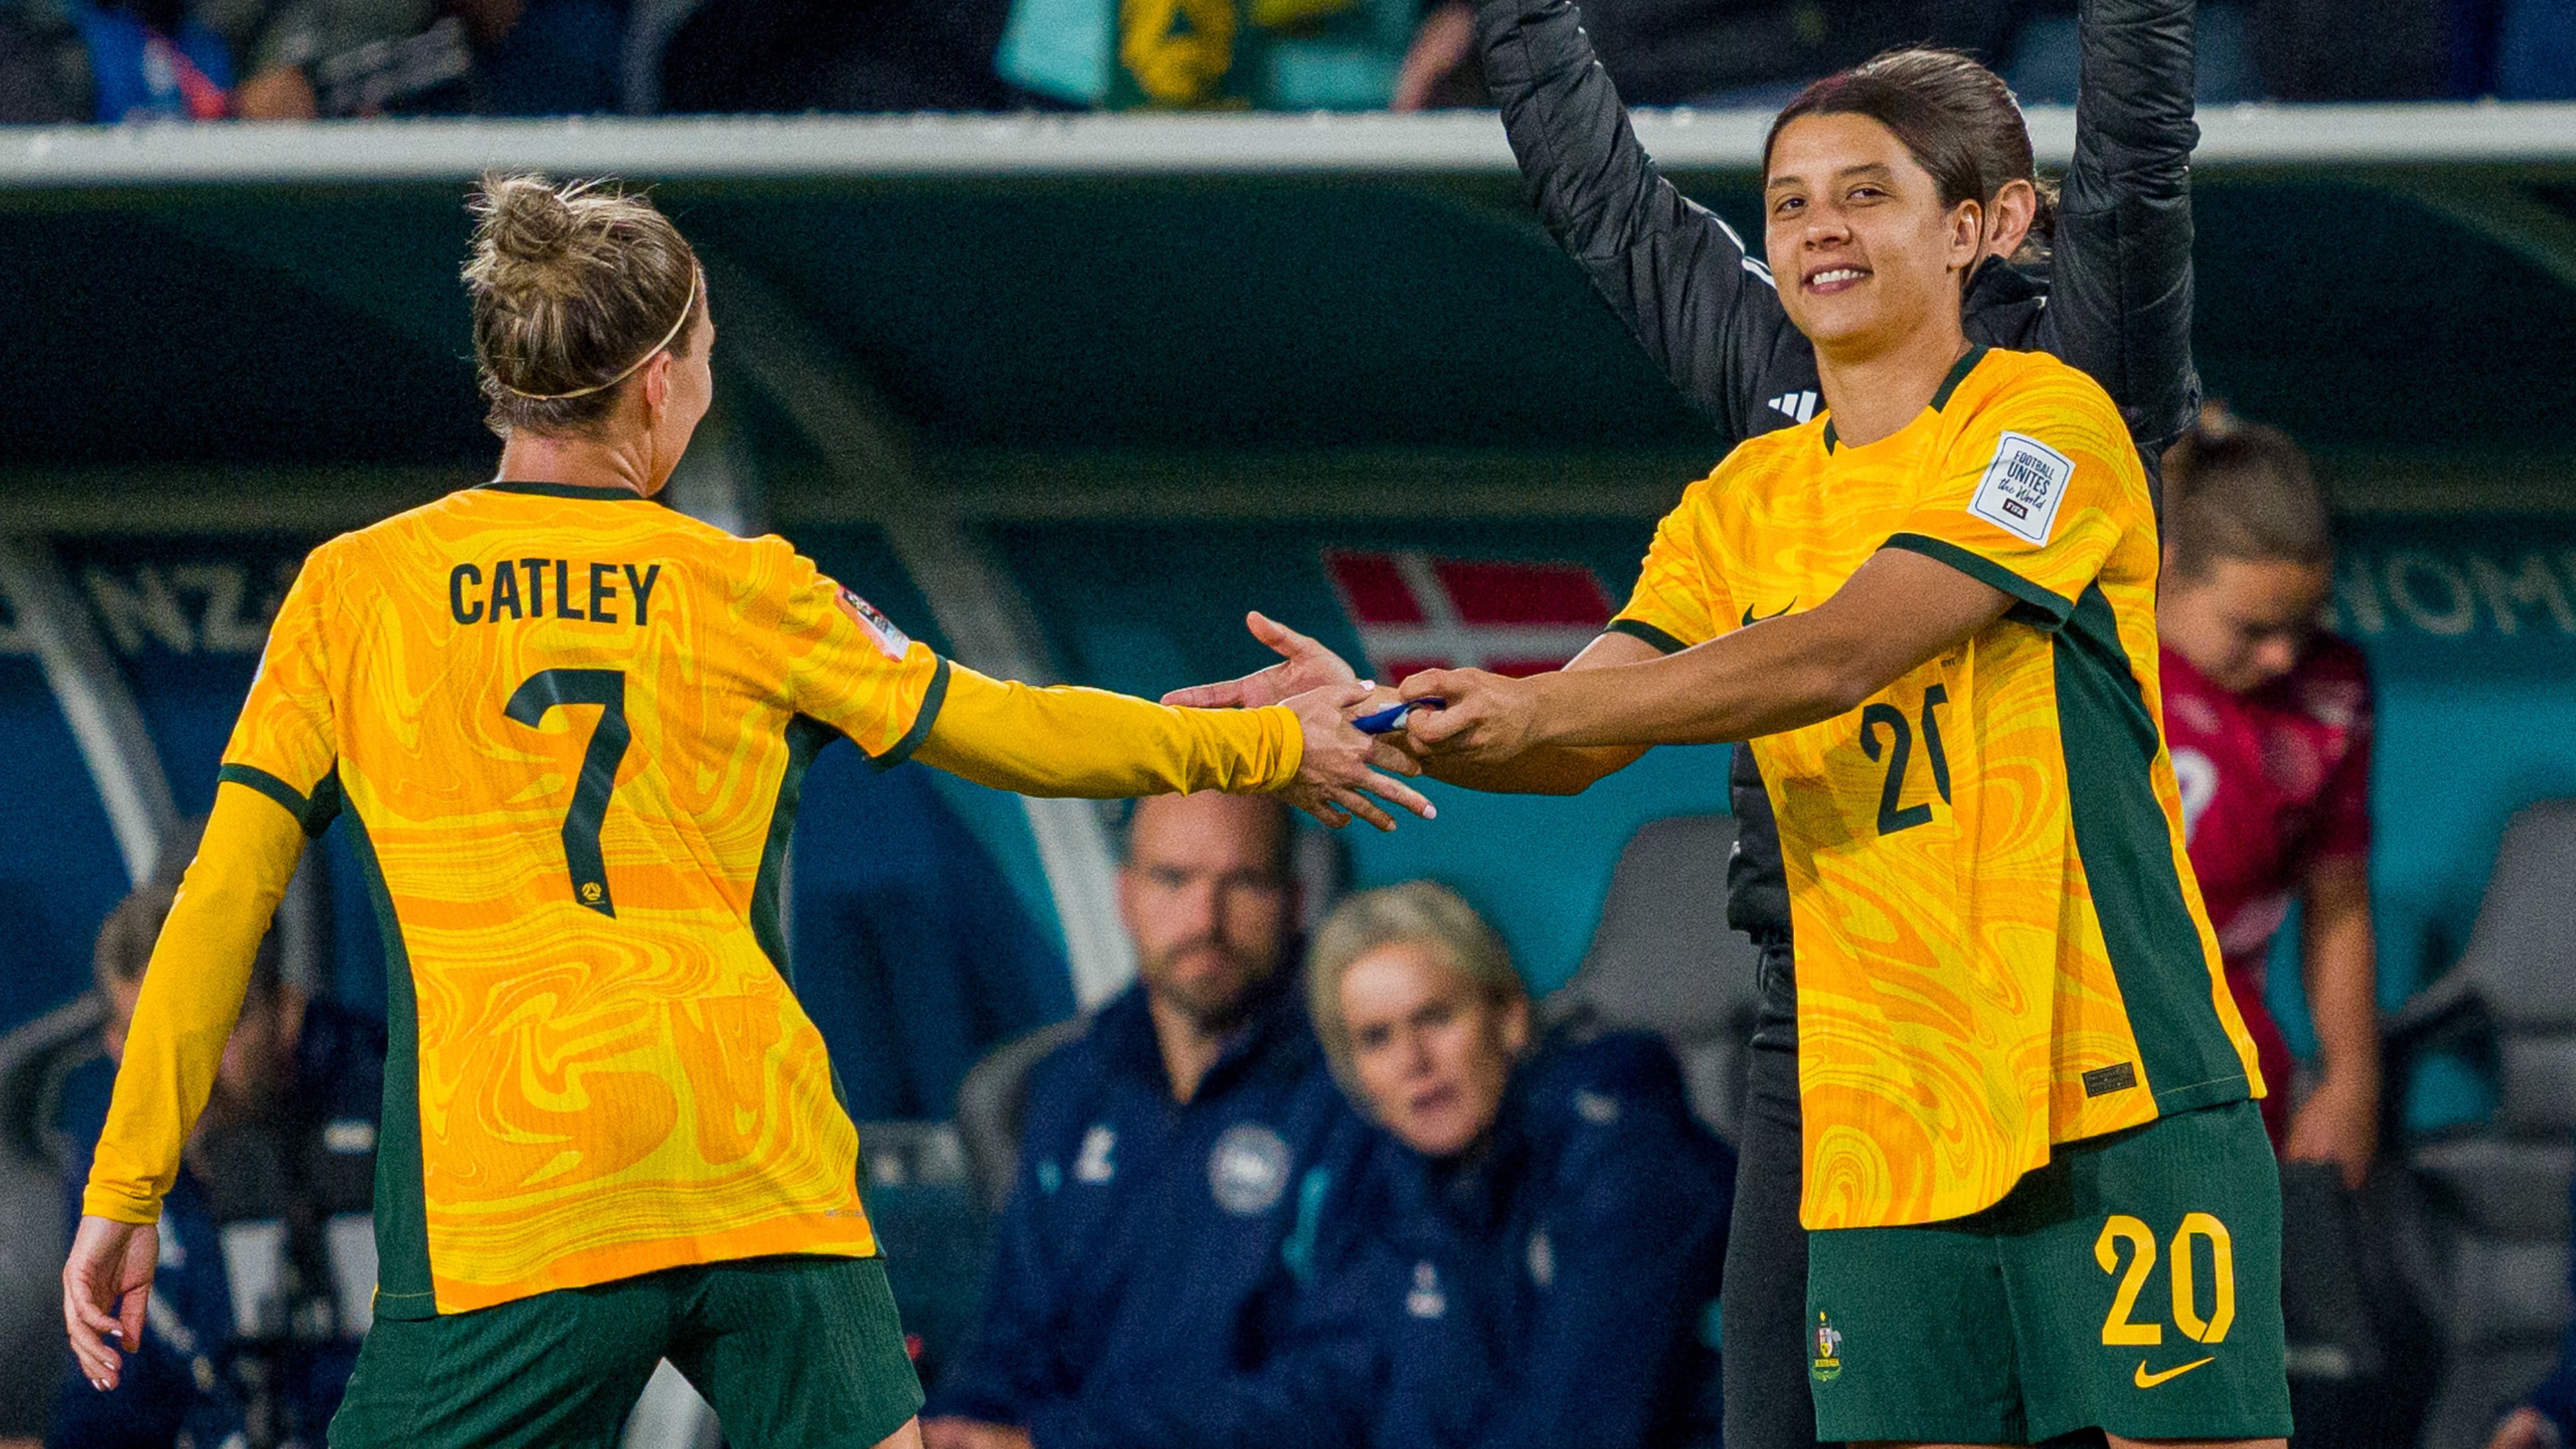 'There were goosebumps': Inside magical moment Sam Kerr made World Cup entrance